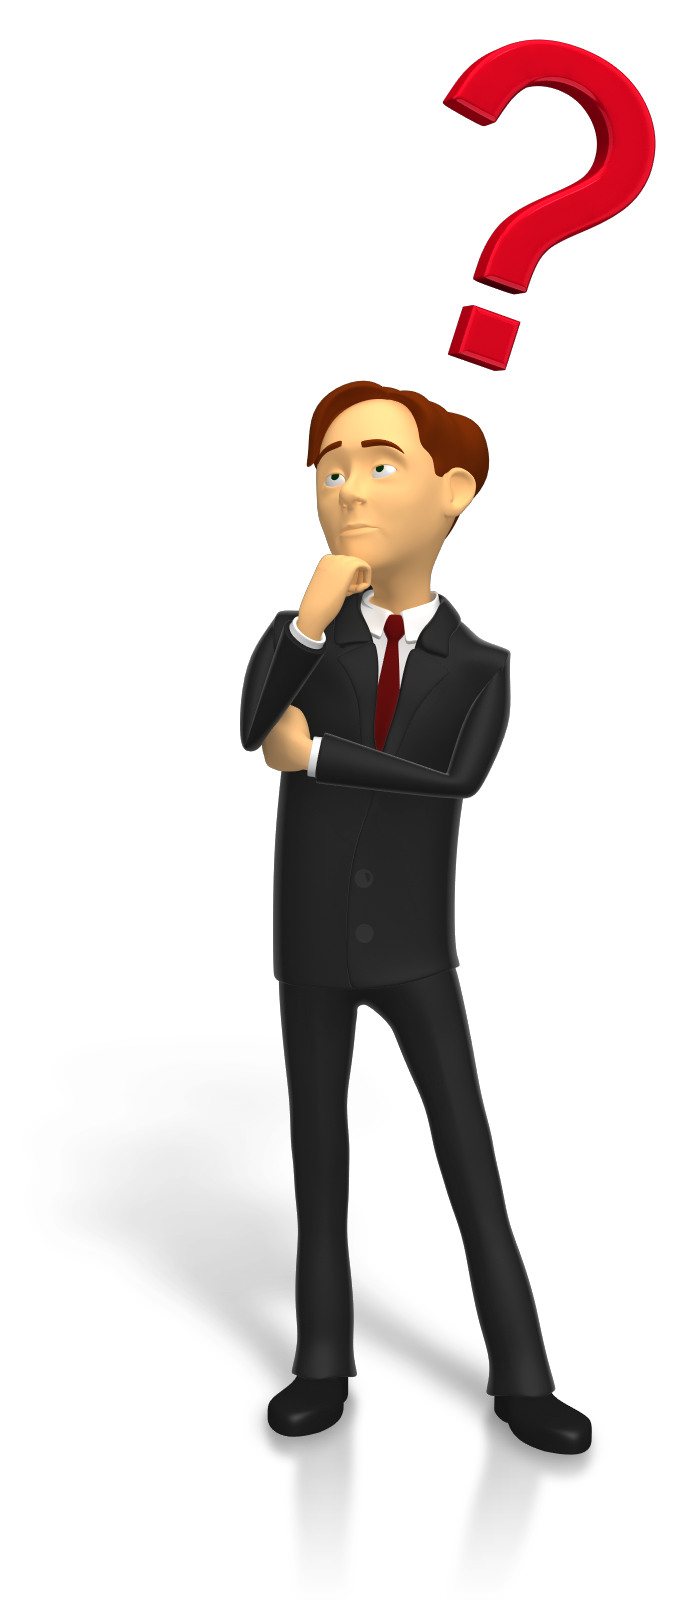 Standing Animation Presentation Powerpoint Businessperson Free Photo PNG PNG Image